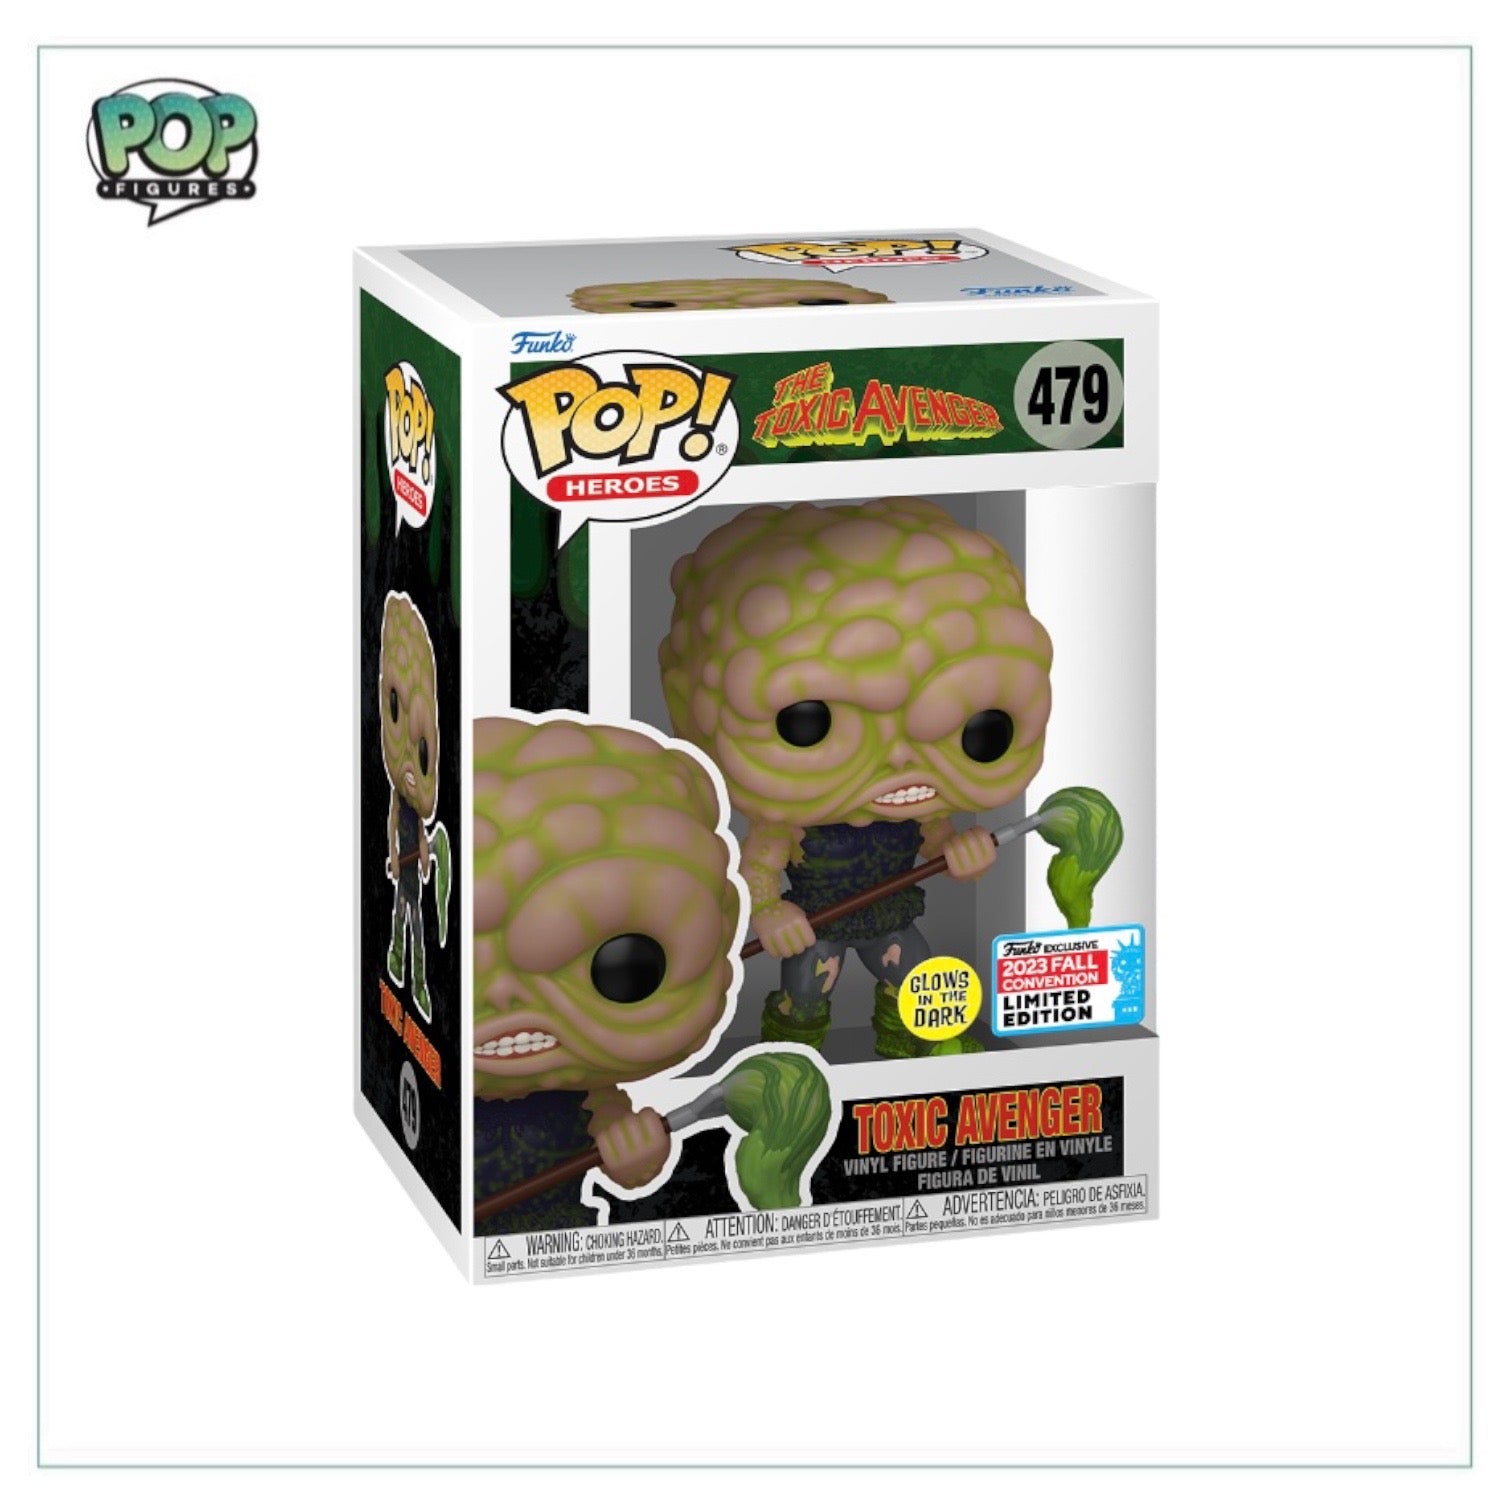 Toxic Avenger #479 (Glows in the Dark) Funko Pop! - The Toxic Avenger - NYCC 2023 Shared Exclusive